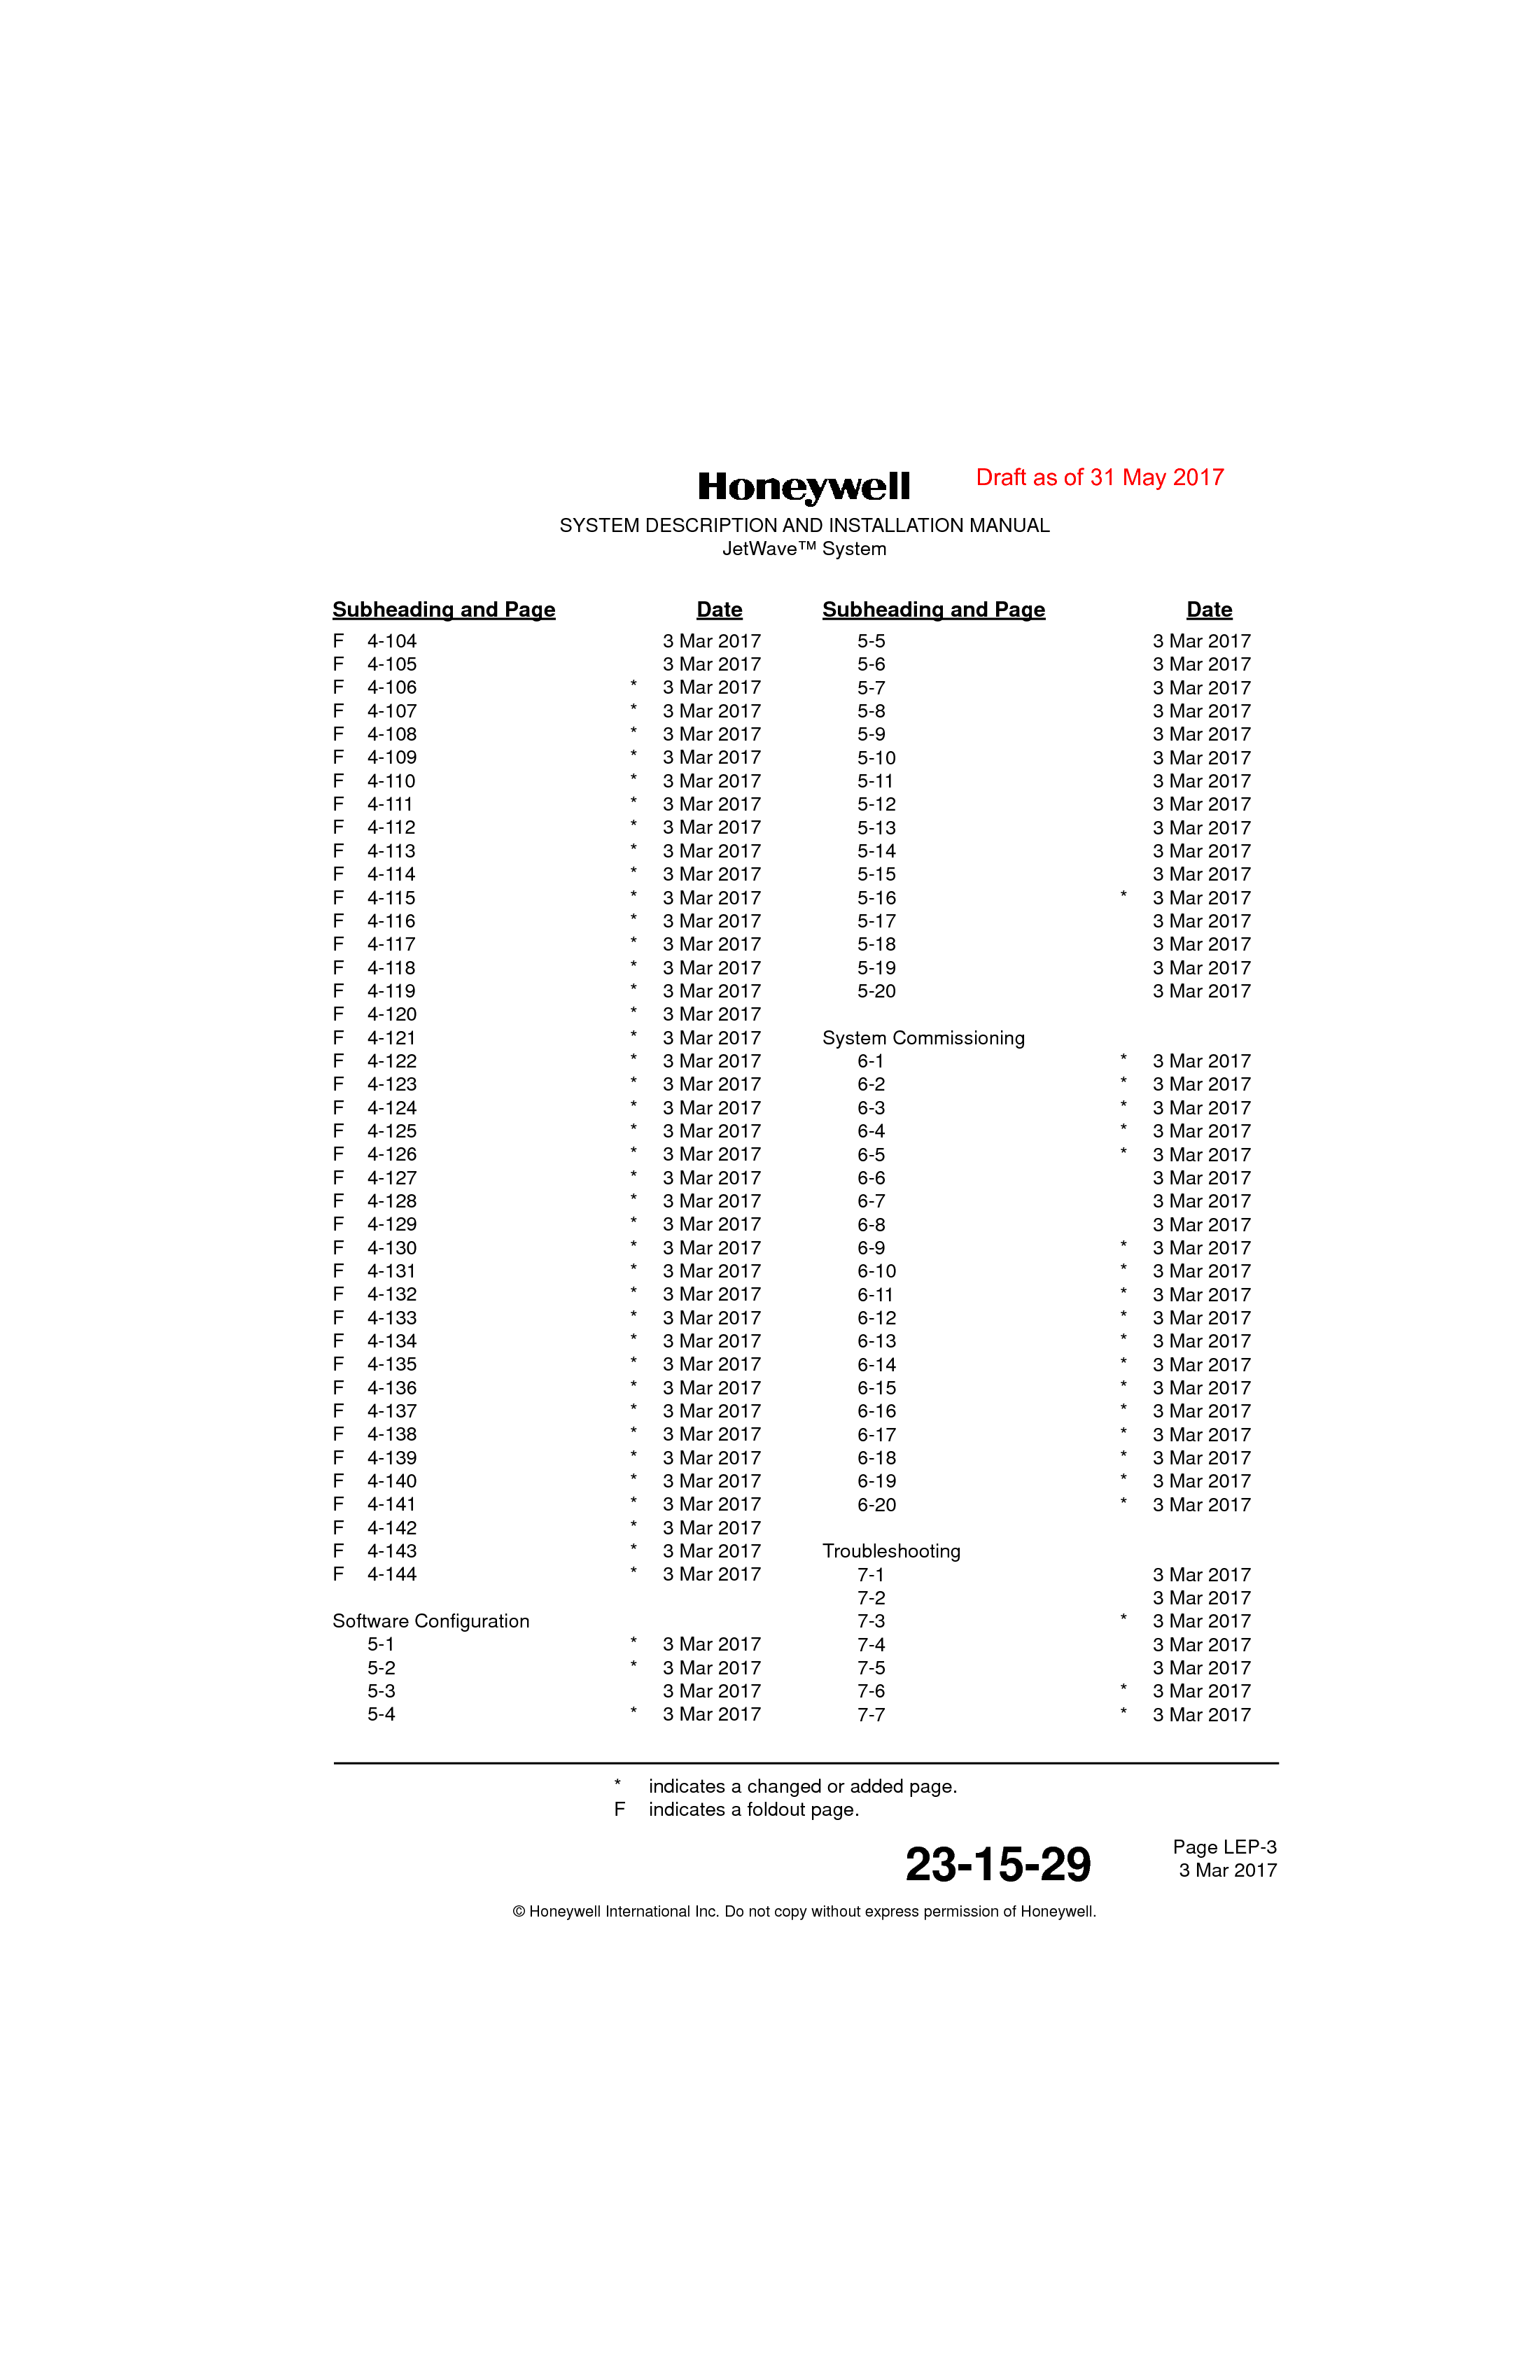 Page LEP-3 3 Mar 201723-15-29SYSTEM DESCRIPTION AND INSTALLATION MANUALJetWave™ System© Honeywell International Inc. Do not copy without express permission of Honeywell.Subheading and Page Date Subheading and Page Date* indicates a changed or added page.F indicates a foldout page.F 4-104  3 Mar 2017F 4-105  3 Mar 2017F 4-106 *  3 Mar 2017F 4-107 *  3 Mar 2017F 4-108 *  3 Mar 2017F 4-109 *  3 Mar 2017F 4-110 *  3 Mar 2017F 4-111 *  3 Mar 2017F 4-112 *  3 Mar 2017F 4-113 *  3 Mar 2017F 4-114 *  3 Mar 2017F 4-115 *  3 Mar 2017F 4-116 *  3 Mar 2017F 4-117 *  3 Mar 2017F 4-118 *  3 Mar 2017F 4-119 *  3 Mar 2017F 4-120 *  3 Mar 2017F 4-121 *  3 Mar 2017F 4-122 *  3 Mar 2017F 4-123 *  3 Mar 2017F 4-124 *  3 Mar 2017F 4-125 *  3 Mar 2017F 4-126 *  3 Mar 2017F 4-127 *  3 Mar 2017F 4-128 *  3 Mar 2017F 4-129 *  3 Mar 2017F 4-130 *  3 Mar 2017F 4-131 *  3 Mar 2017F 4-132 *  3 Mar 2017F 4-133 *  3 Mar 2017F 4-134 *  3 Mar 2017F 4-135 *  3 Mar 2017F 4-136 *  3 Mar 2017F 4-137 *  3 Mar 2017F 4-138 *  3 Mar 2017F 4-139 *  3 Mar 2017F 4-140 *  3 Mar 2017F 4-141 *  3 Mar 2017F 4-142 *  3 Mar 2017F 4-143 *  3 Mar 2017F 4-144 *  3 Mar 2017Software Configuration5-1 *  3 Mar 20175-2 *  3 Mar 20175-3  3 Mar 20175-4 *  3 Mar 20175-5  3 Mar 20175-6  3 Mar 20175-7  3 Mar 20175-8  3 Mar 20175-9  3 Mar 20175-10  3 Mar 20175-11  3 Mar 20175-12  3 Mar 20175-13  3 Mar 20175-14  3 Mar 20175-15  3 Mar 20175-16 *  3 Mar 20175-17  3 Mar 20175-18  3 Mar 20175-19  3 Mar 20175-20  3 Mar 2017System Commissioning6-1 *  3 Mar 20176-2 *  3 Mar 20176-3 *  3 Mar 20176-4 *  3 Mar 20176-5 *  3 Mar 20176-6  3 Mar 20176-7  3 Mar 20176-8  3 Mar 20176-9 *  3 Mar 20176-10 *  3 Mar 20176-11 *  3 Mar 20176-12 *  3 Mar 20176-13 *  3 Mar 20176-14 *  3 Mar 20176-15 *  3 Mar 20176-16 *  3 Mar 20176-17 *  3 Mar 20176-18 *  3 Mar 20176-19 *  3 Mar 20176-20 *  3 Mar 2017Troubleshooting7-1  3 Mar 20177-2  3 Mar 20177-3 *  3 Mar 20177-4  3 Mar 20177-5  3 Mar 20177-6 *  3 Mar 20177-7 *  3 Mar 2017Draft as of 31 May 2017